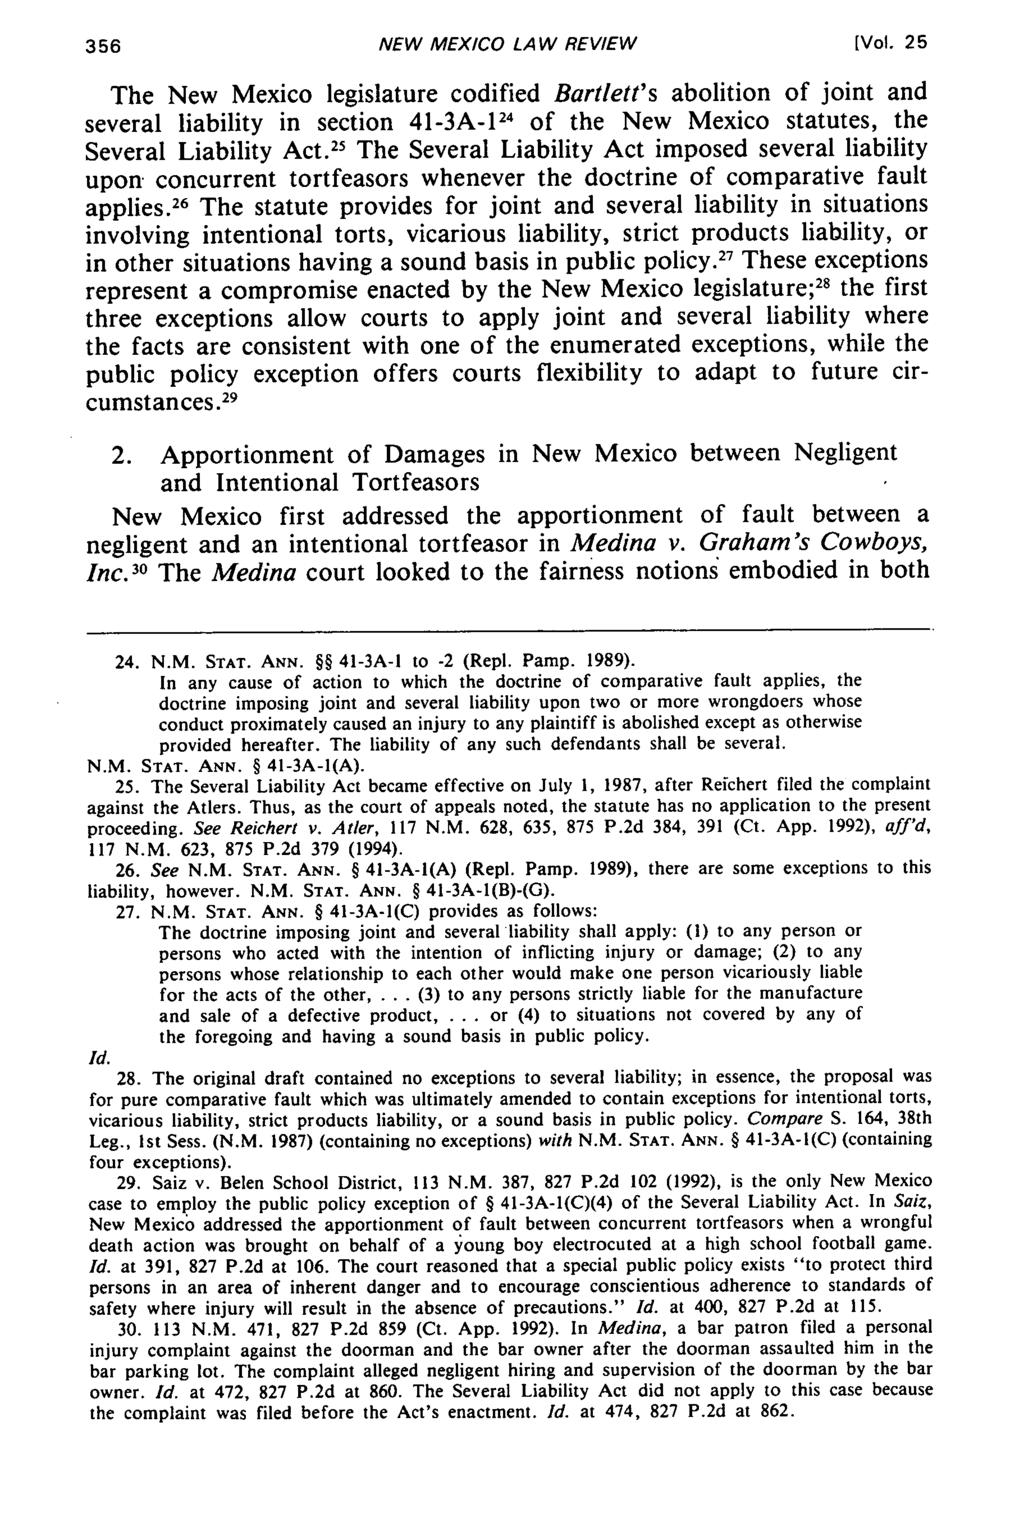 NEW MEXICO LAW REVIEW [Vol. 2 5 The New Mexico legislature codified Bartlett's abolition of joint and several liability in section 41-3A-1 24 of the New Mexico statutes, the Several Liability Act.